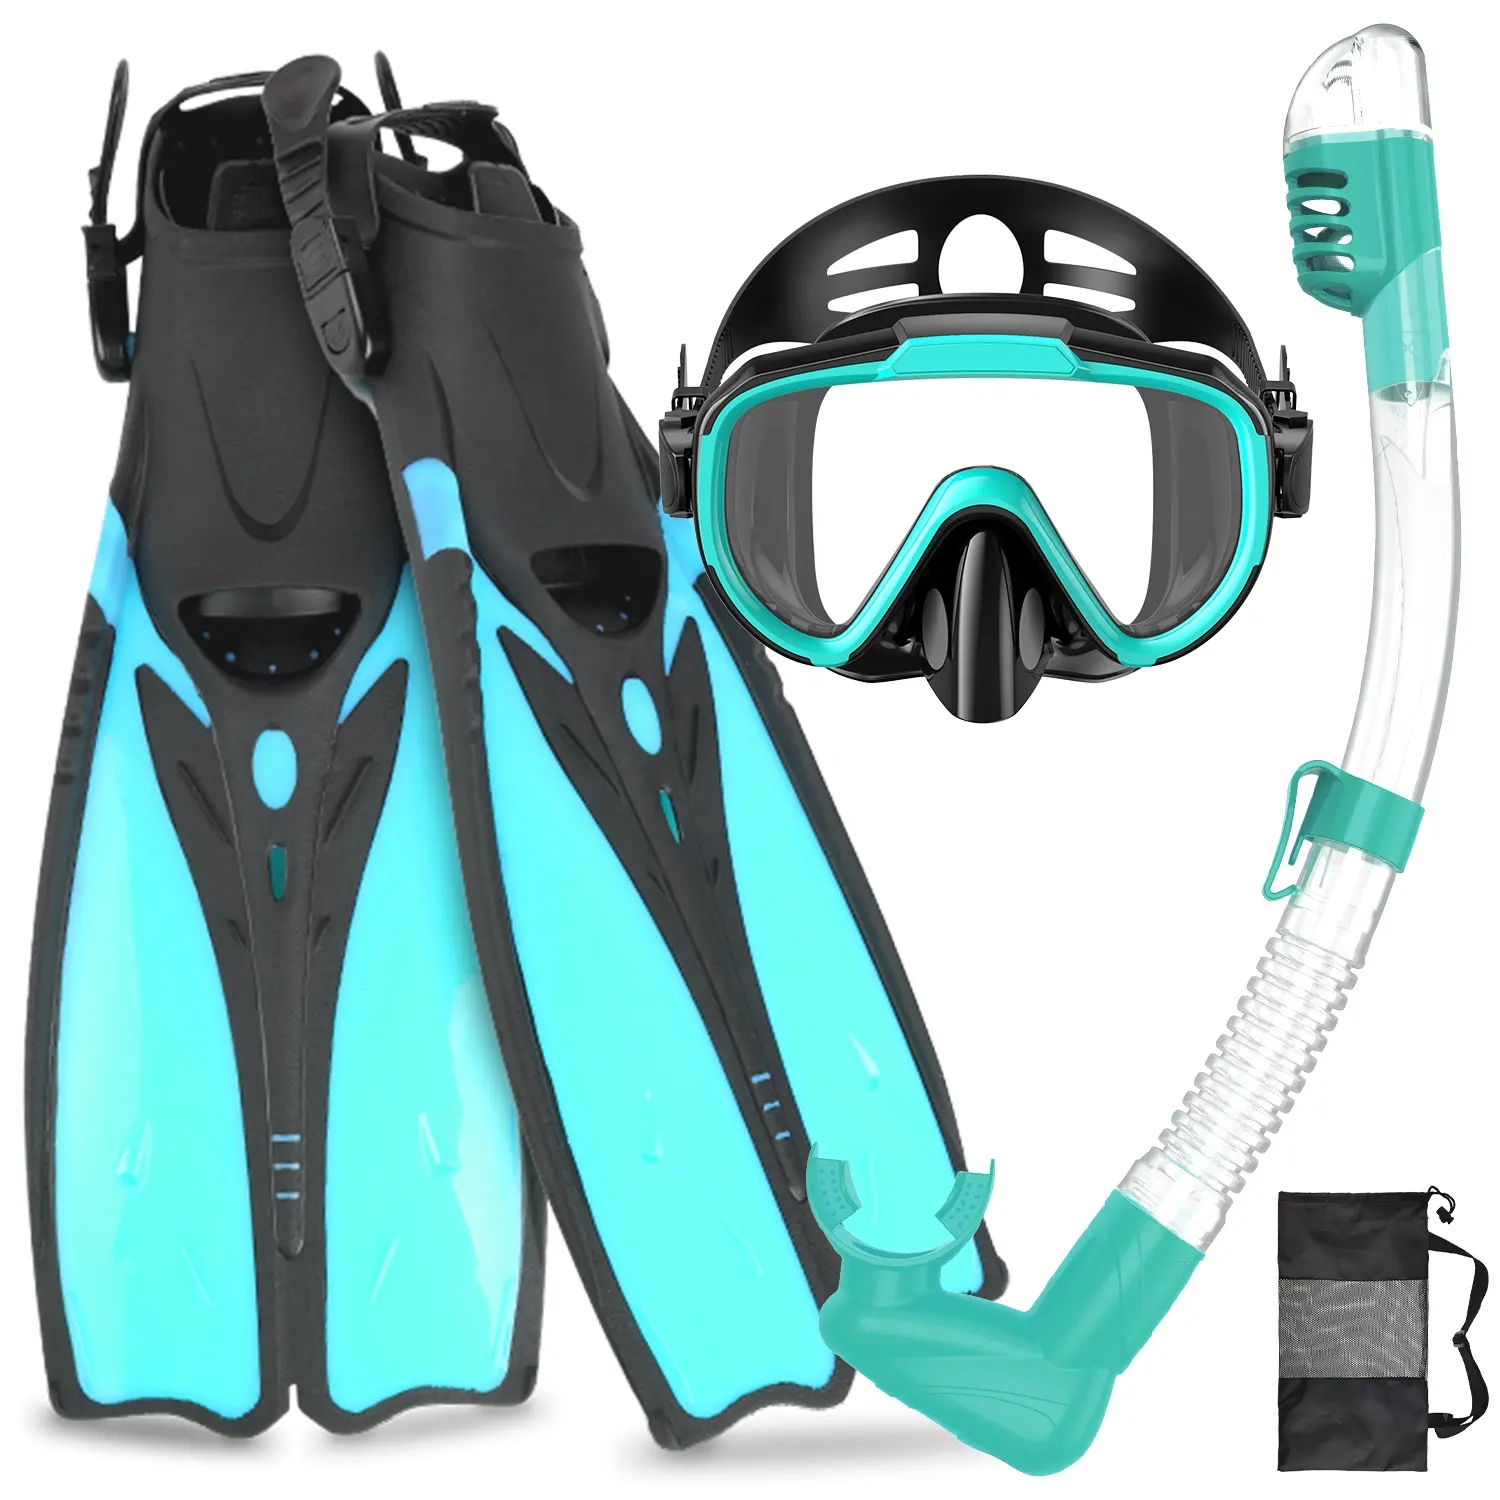 New Diving Goggles Mask Scuba Snorkel Kits Adults Diving Gear With Snorkel Set With Swim Flipper Fins